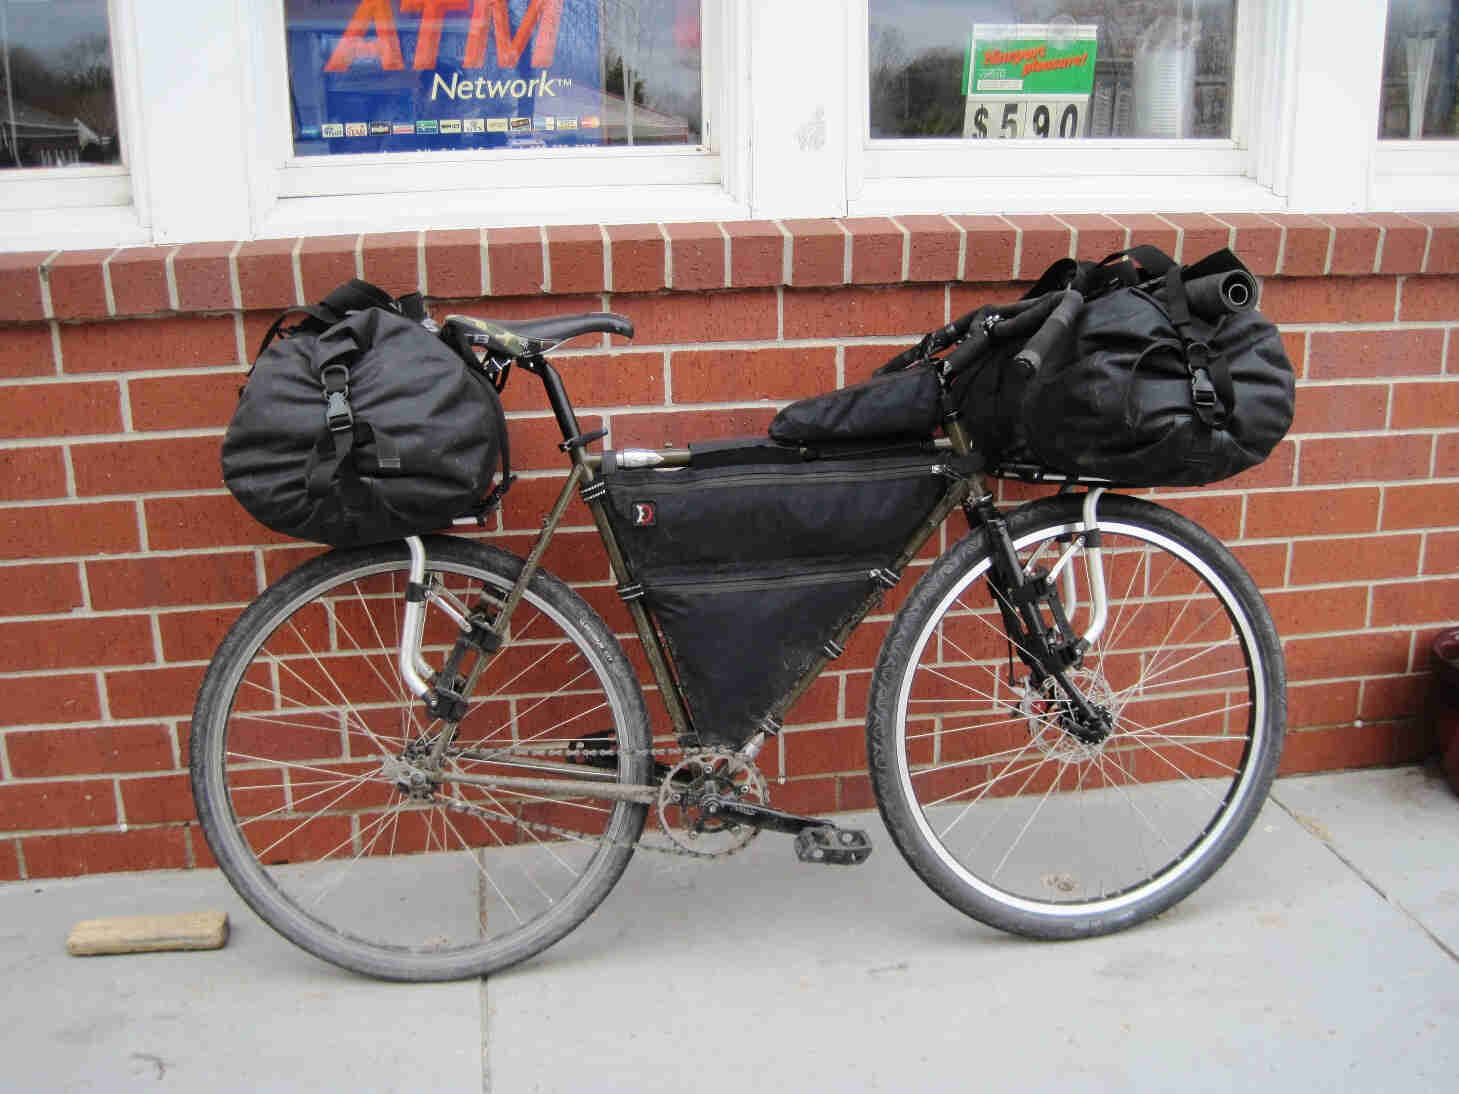 Right side view of a Surly bike, loaded with gear, parked on a sidewalk and leaning against a short brick wall